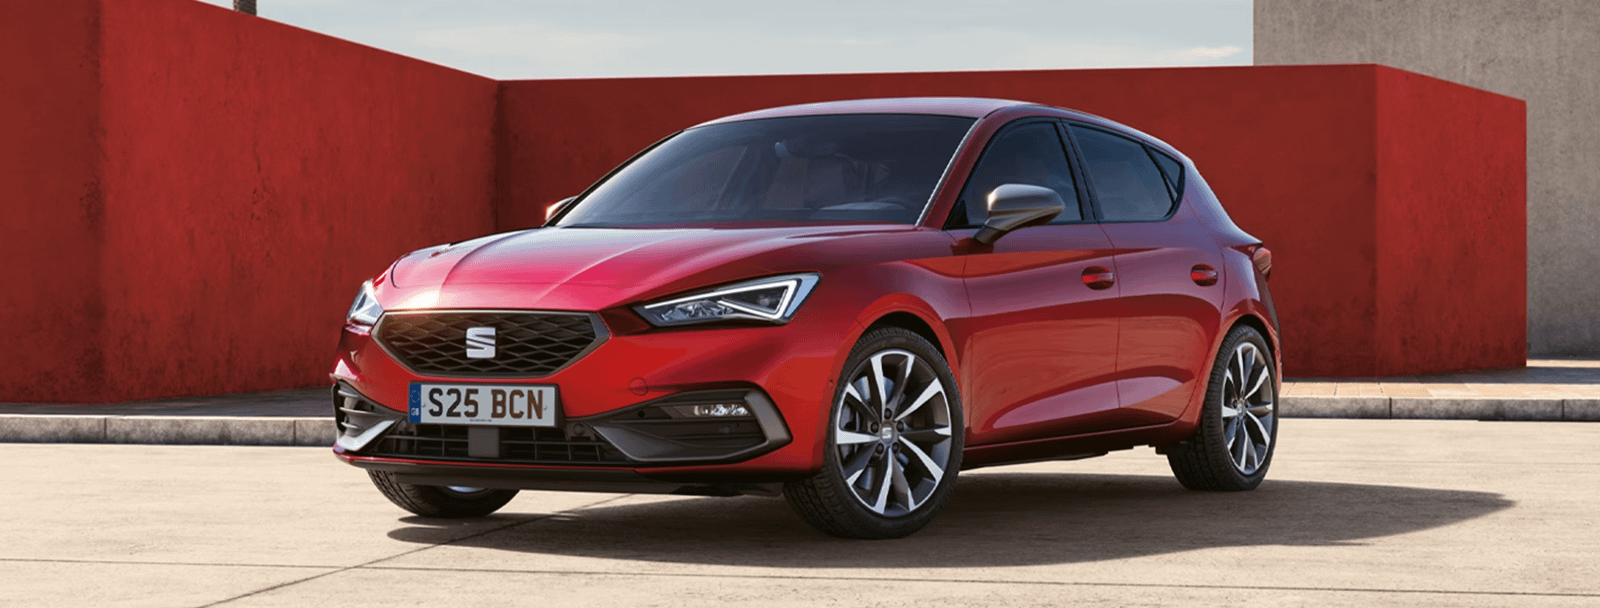 Seat Leon: 5 reasons why it's our 2022 Best Family Car